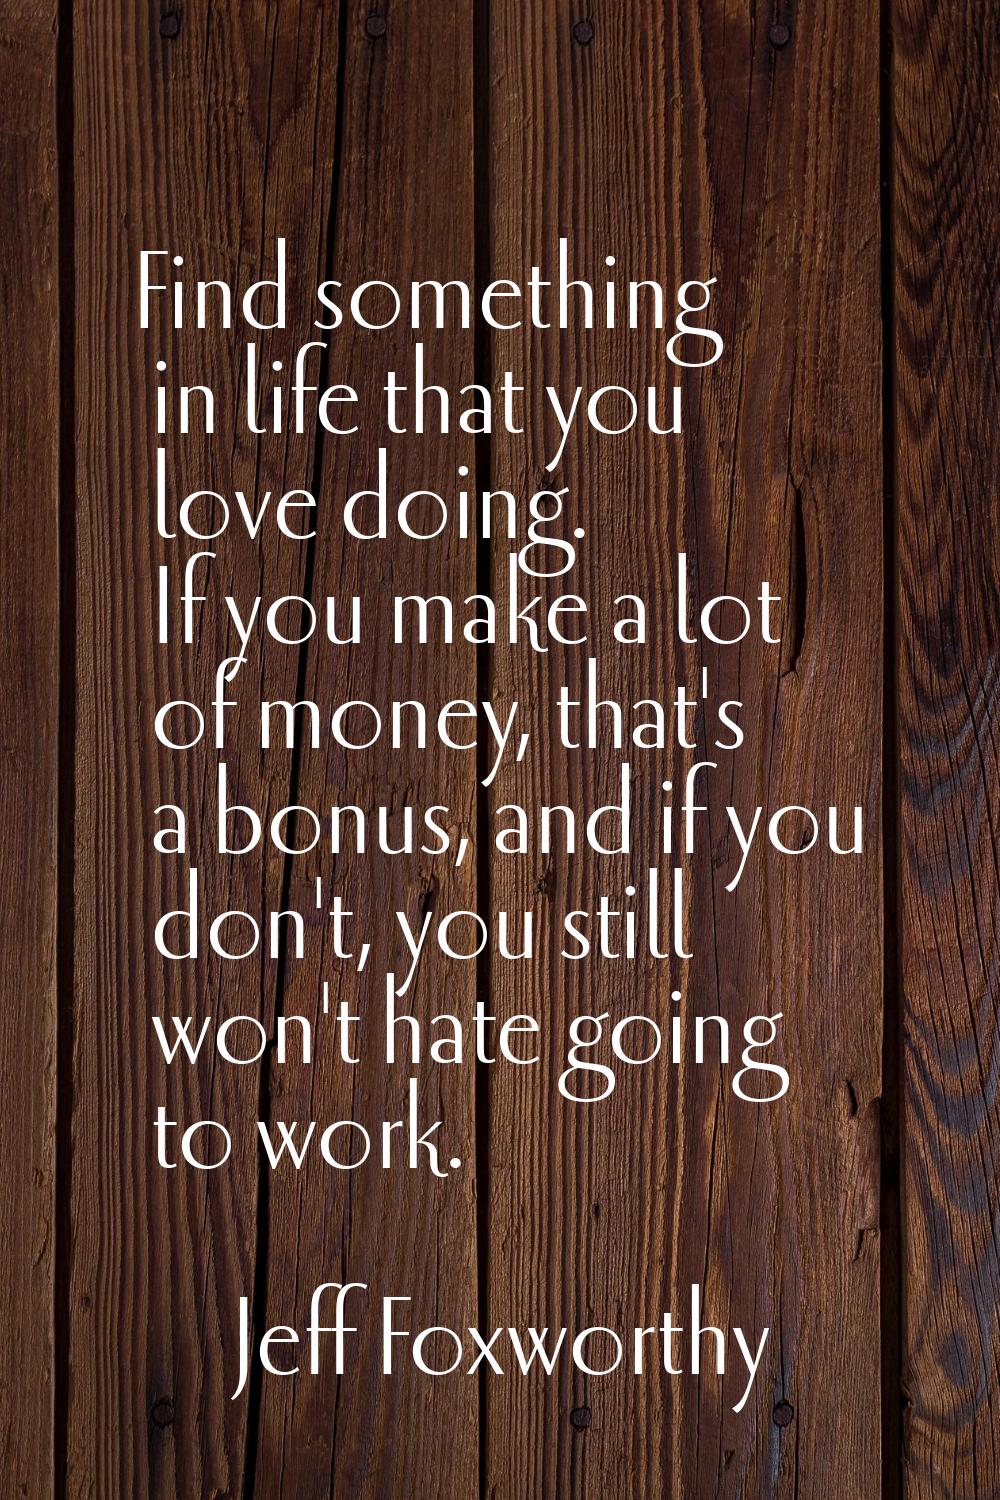 Find something in life that you love doing. If you make a lot of money, that's a bonus, and if you 